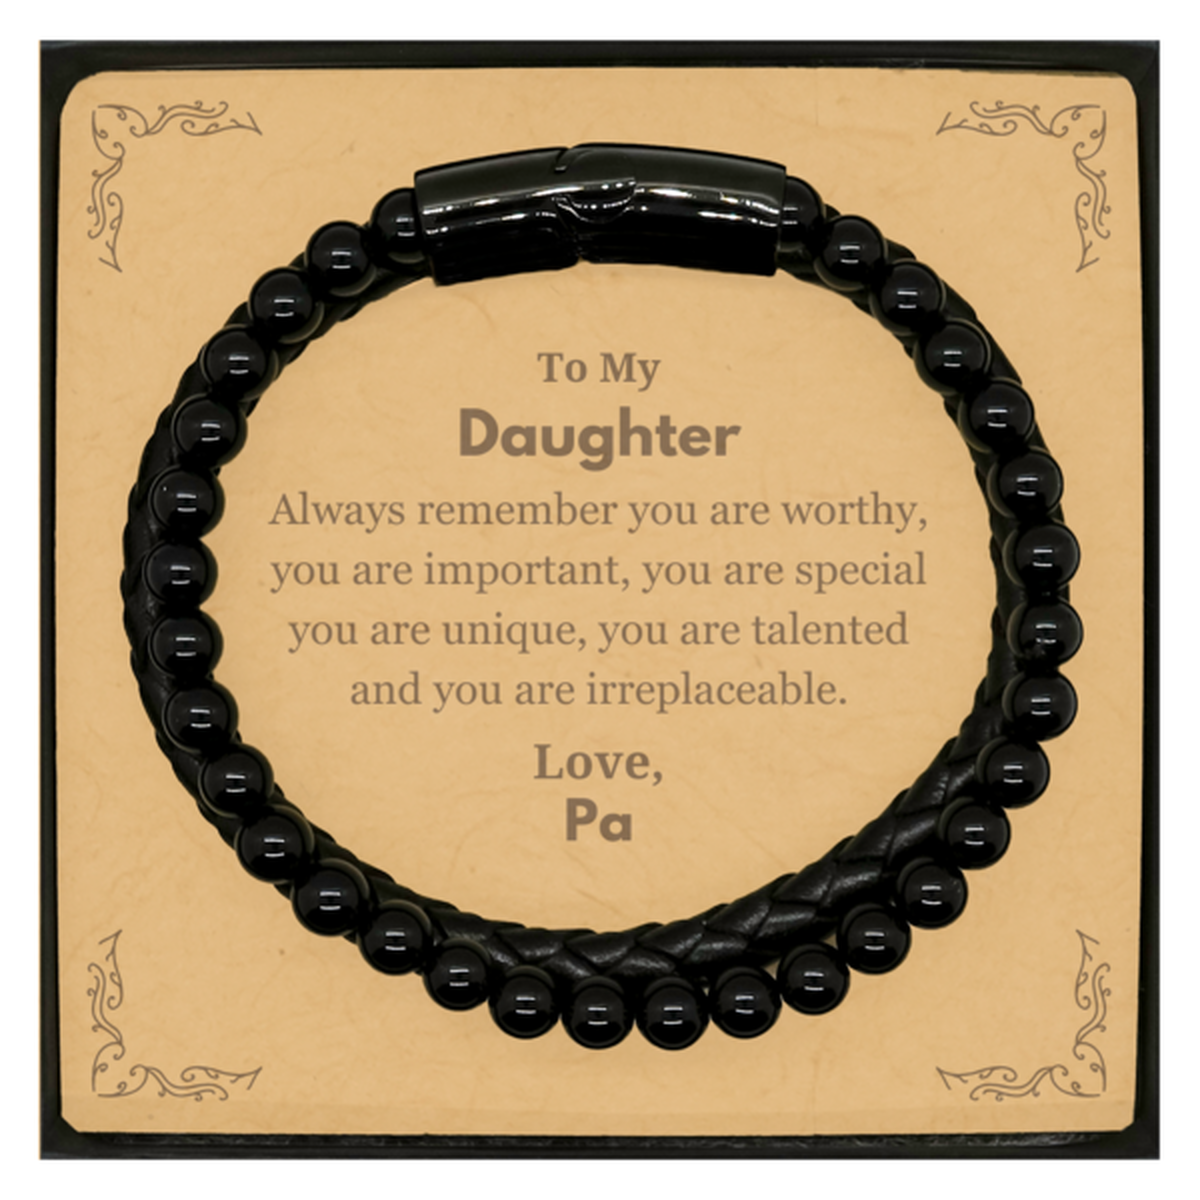 Daughter Birthday Gifts from Pa, Inspirational Stone Leather Bracelets for Daughter Christmas Graduation Gifts for Daughter Always remember you are worthy, you are important. Love, Pa